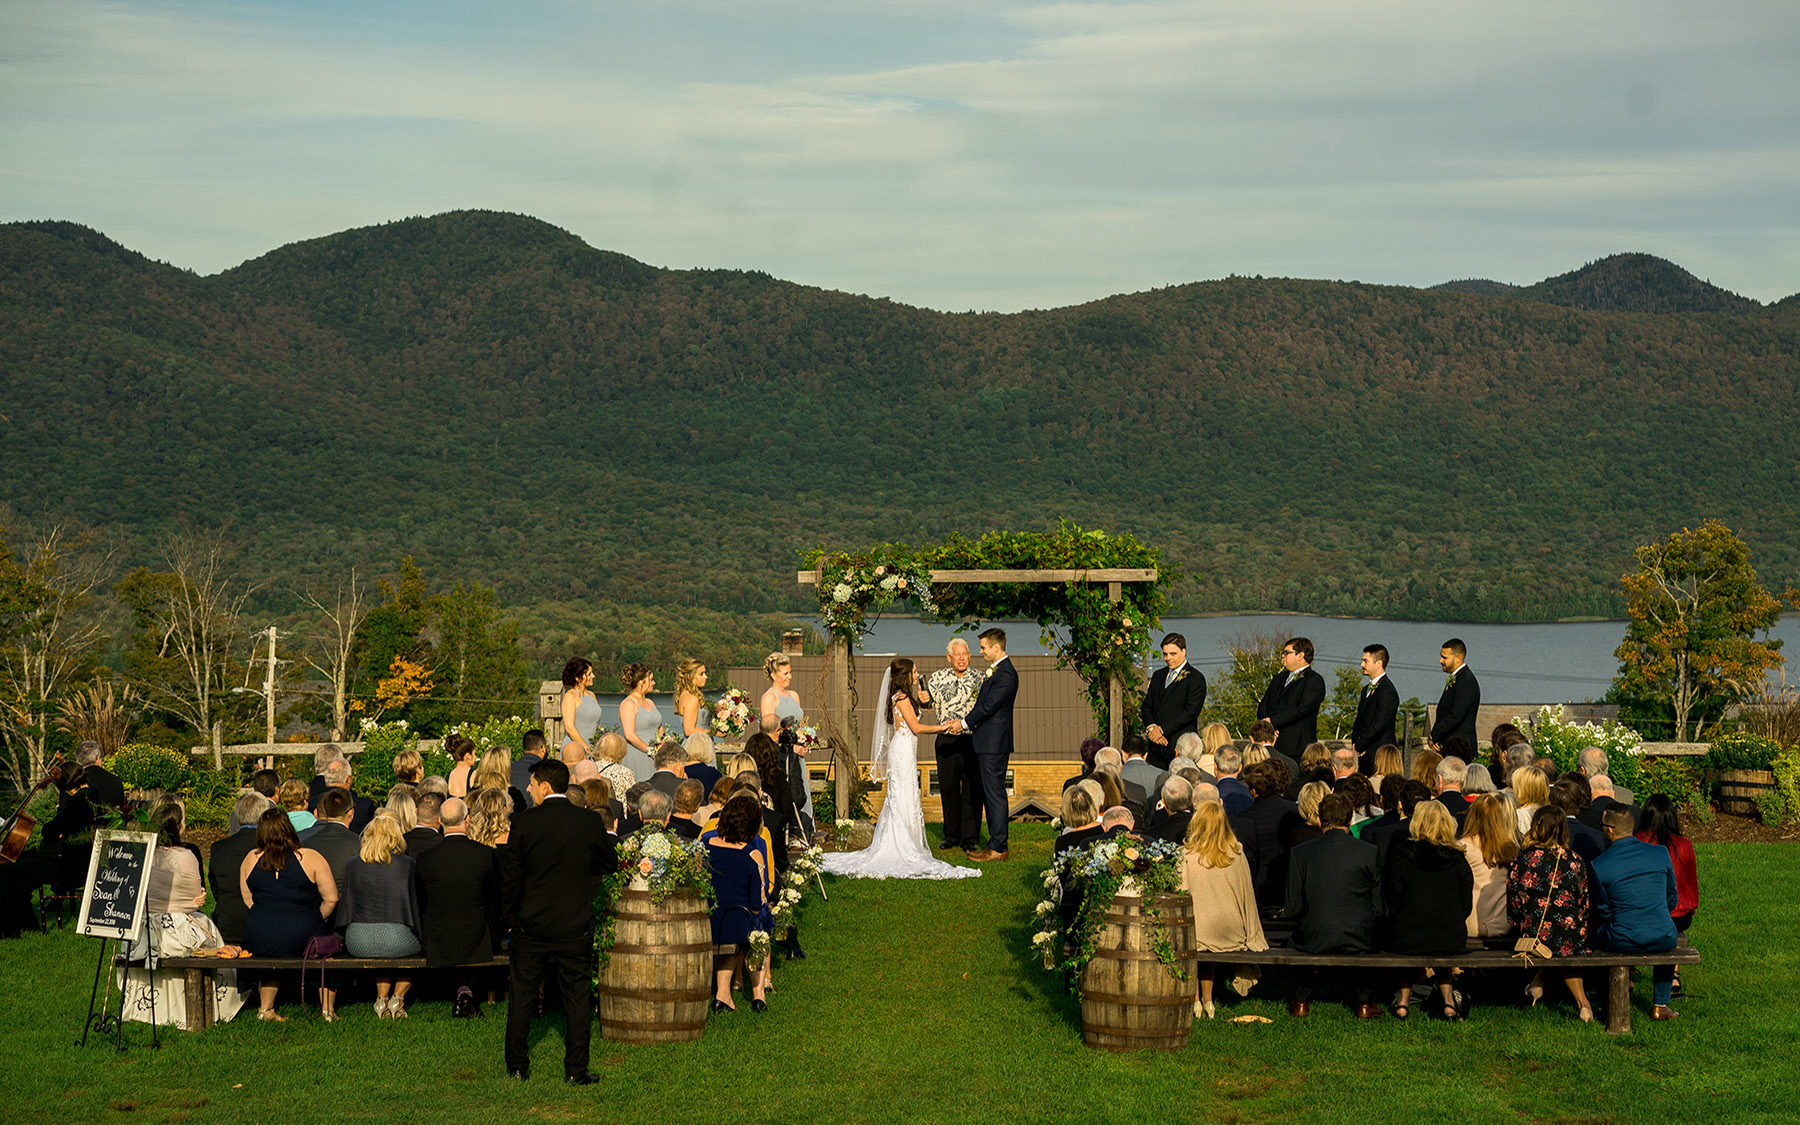 Group of people at outdoor wedding in various attire sitting on wooden benches in front of floral archway with bridal party and groom party in front overlooking lake and mountain at Mountain Top Inn & Resort in Chittenden, VT